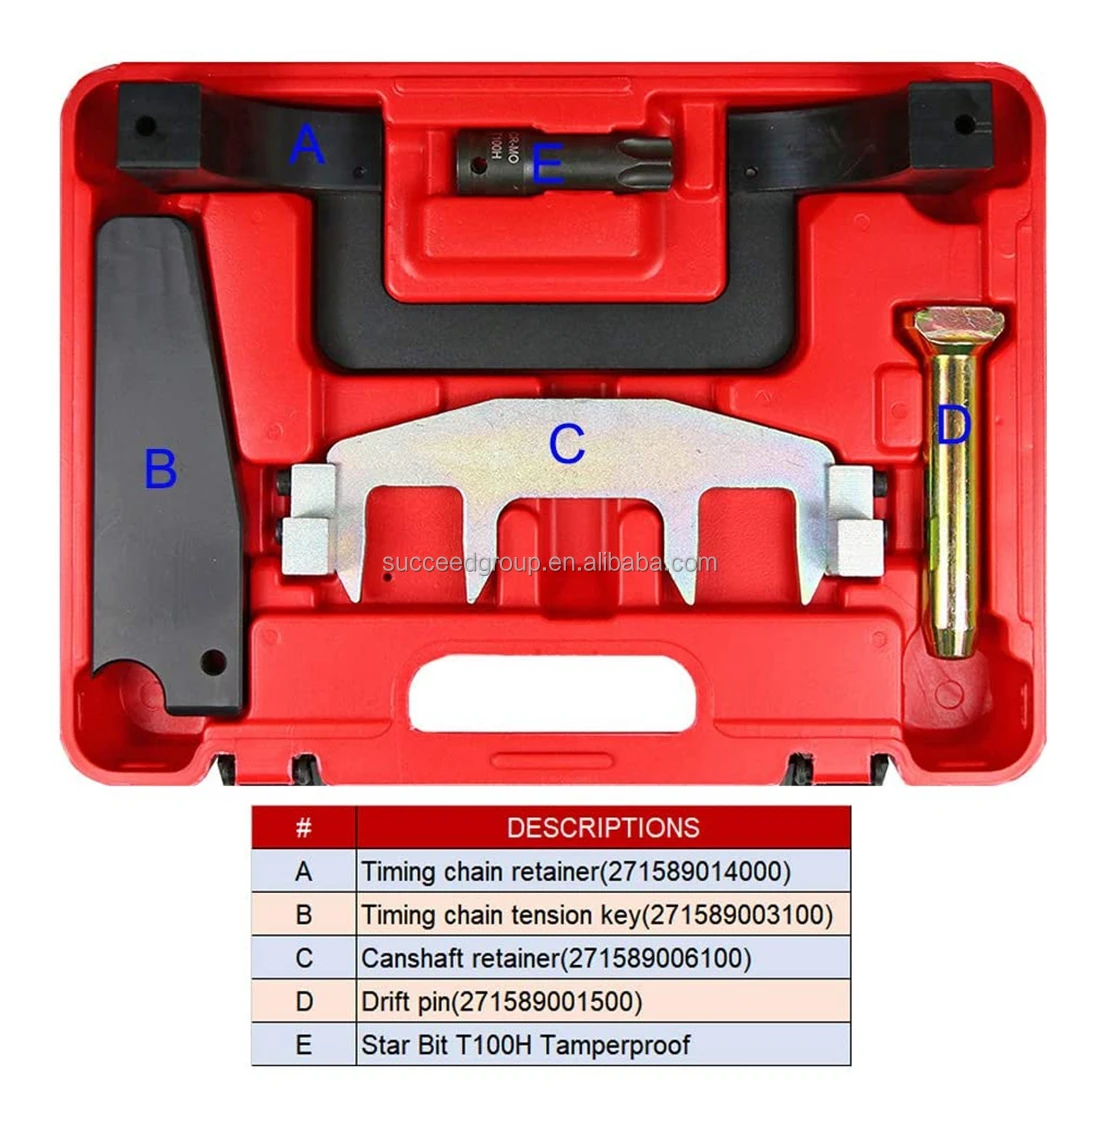 Camshaft Alignment Timing Chain Fixture Tool Kit is Compatible